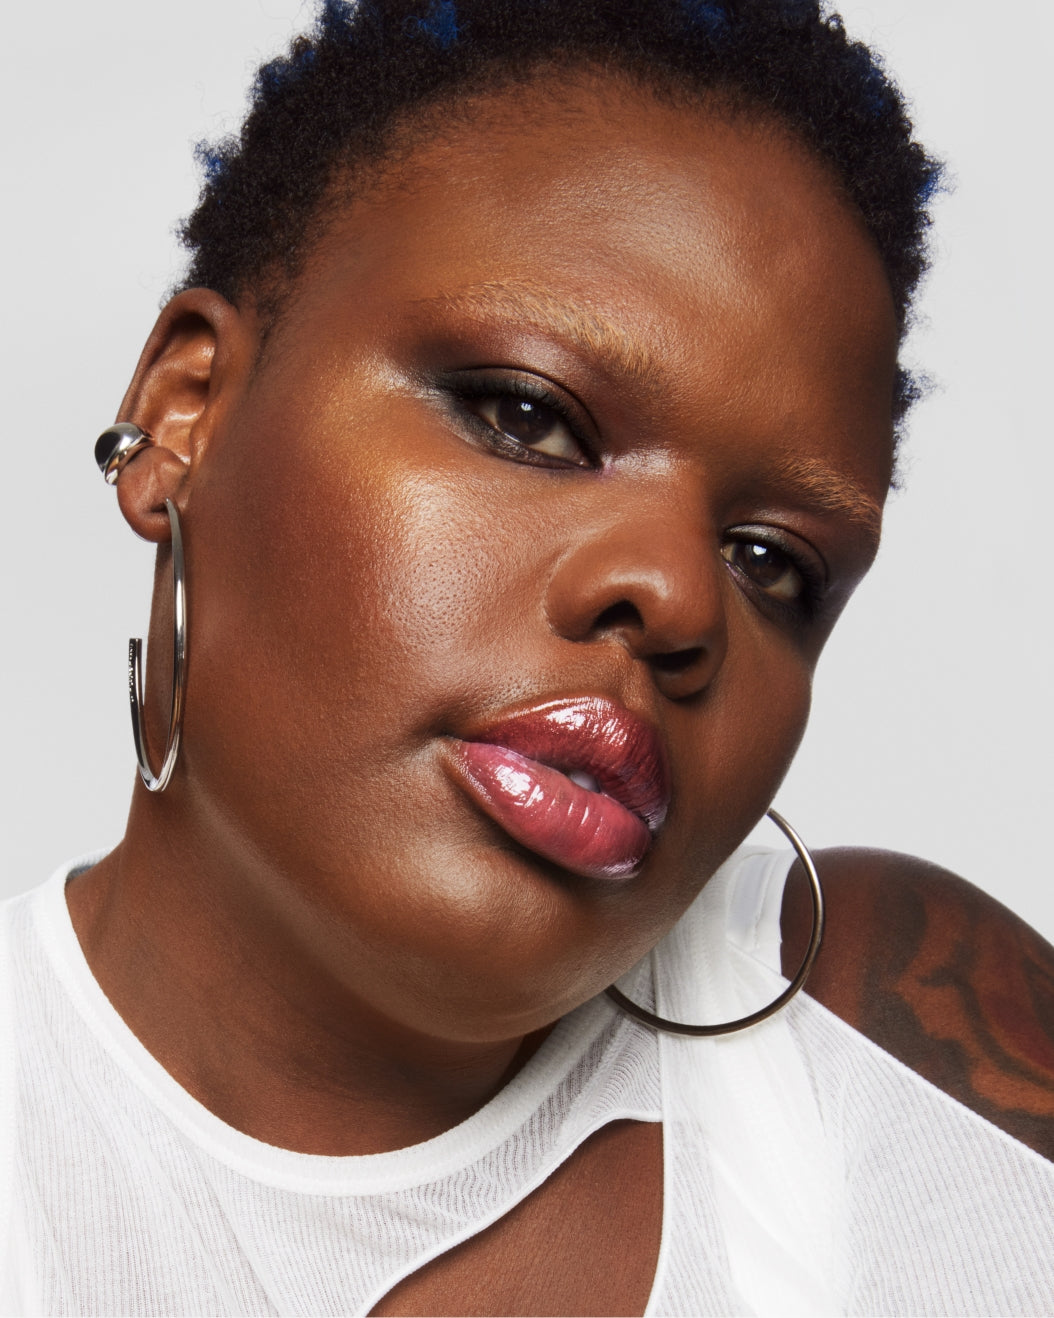 Model with a medium-deep skin tone wearing Milk Makeup Odyssey Lip Oil Gloss in Trek against a white background